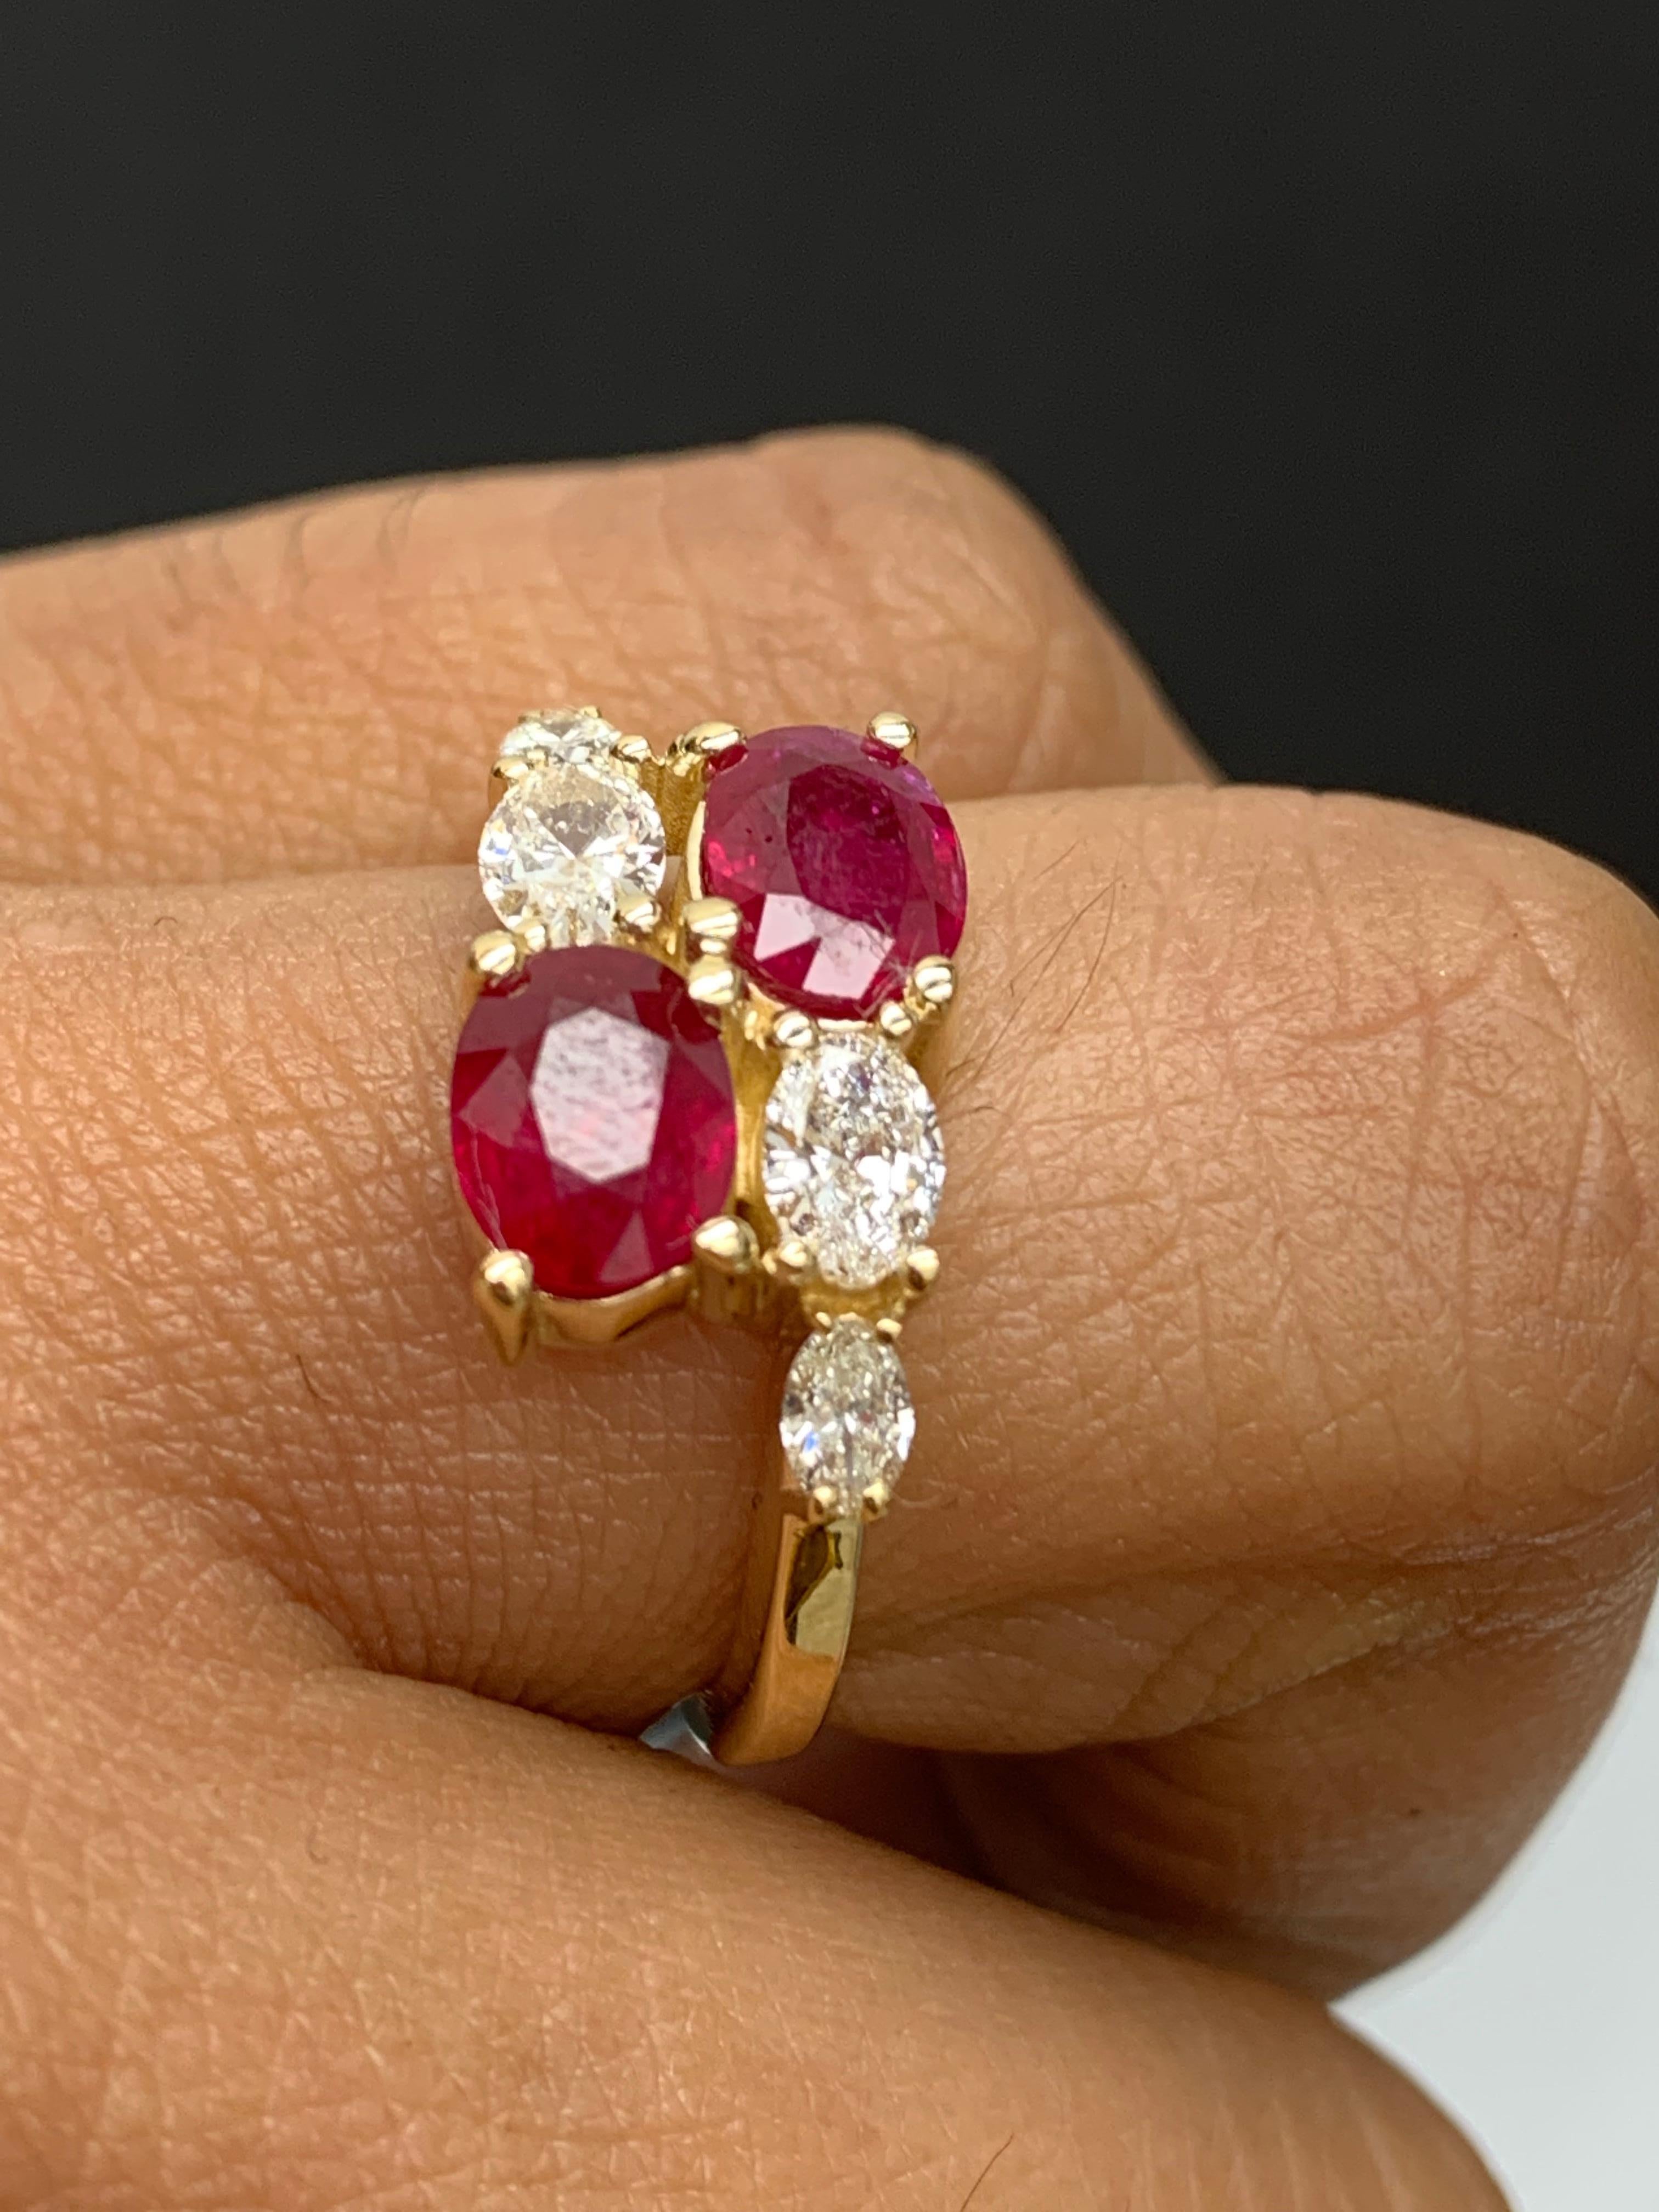 2.18 Carat Oval Cut Ruby Diamond Toi et Moi Engagement Ring in 14K Yellow Gold For Sale 1